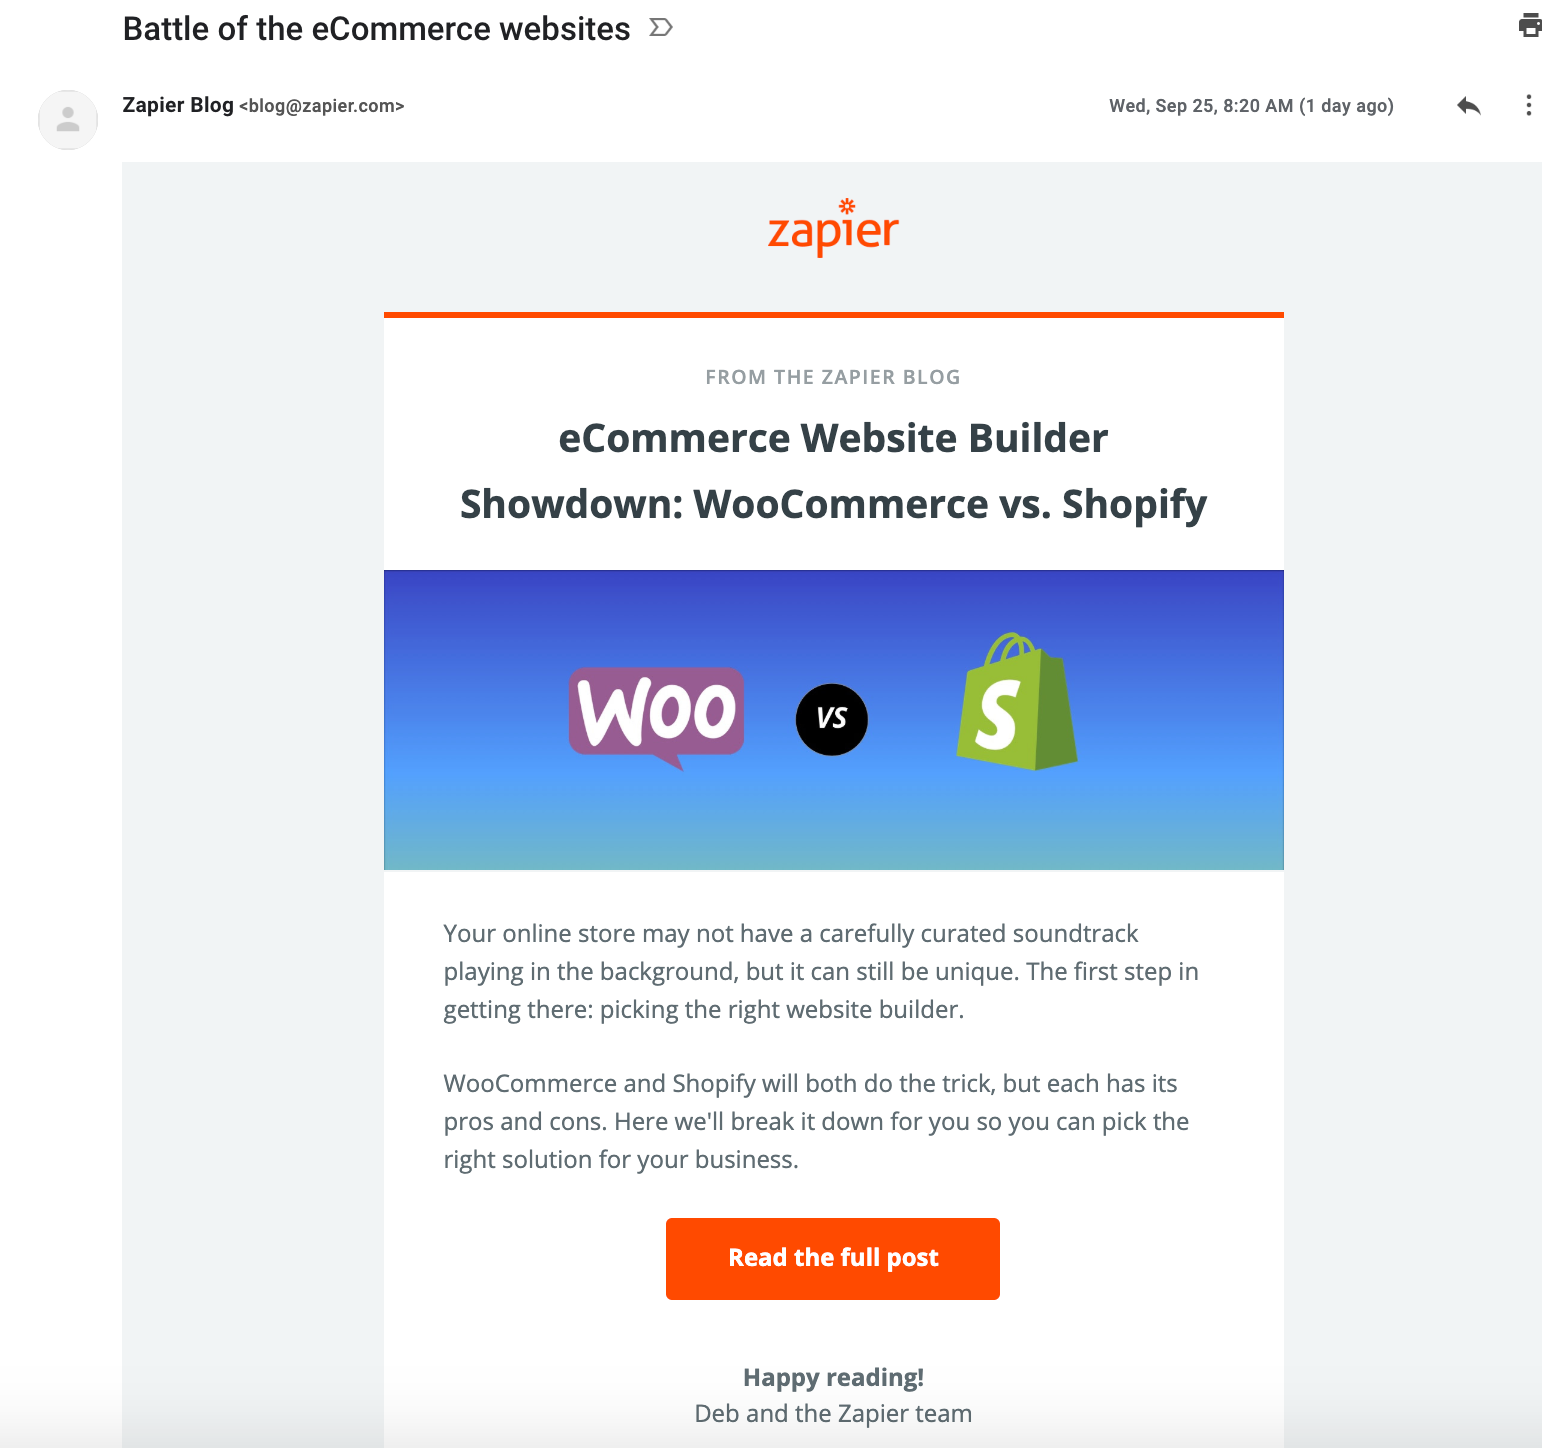 5 Creative B2B Emails You Hadn’t Considered